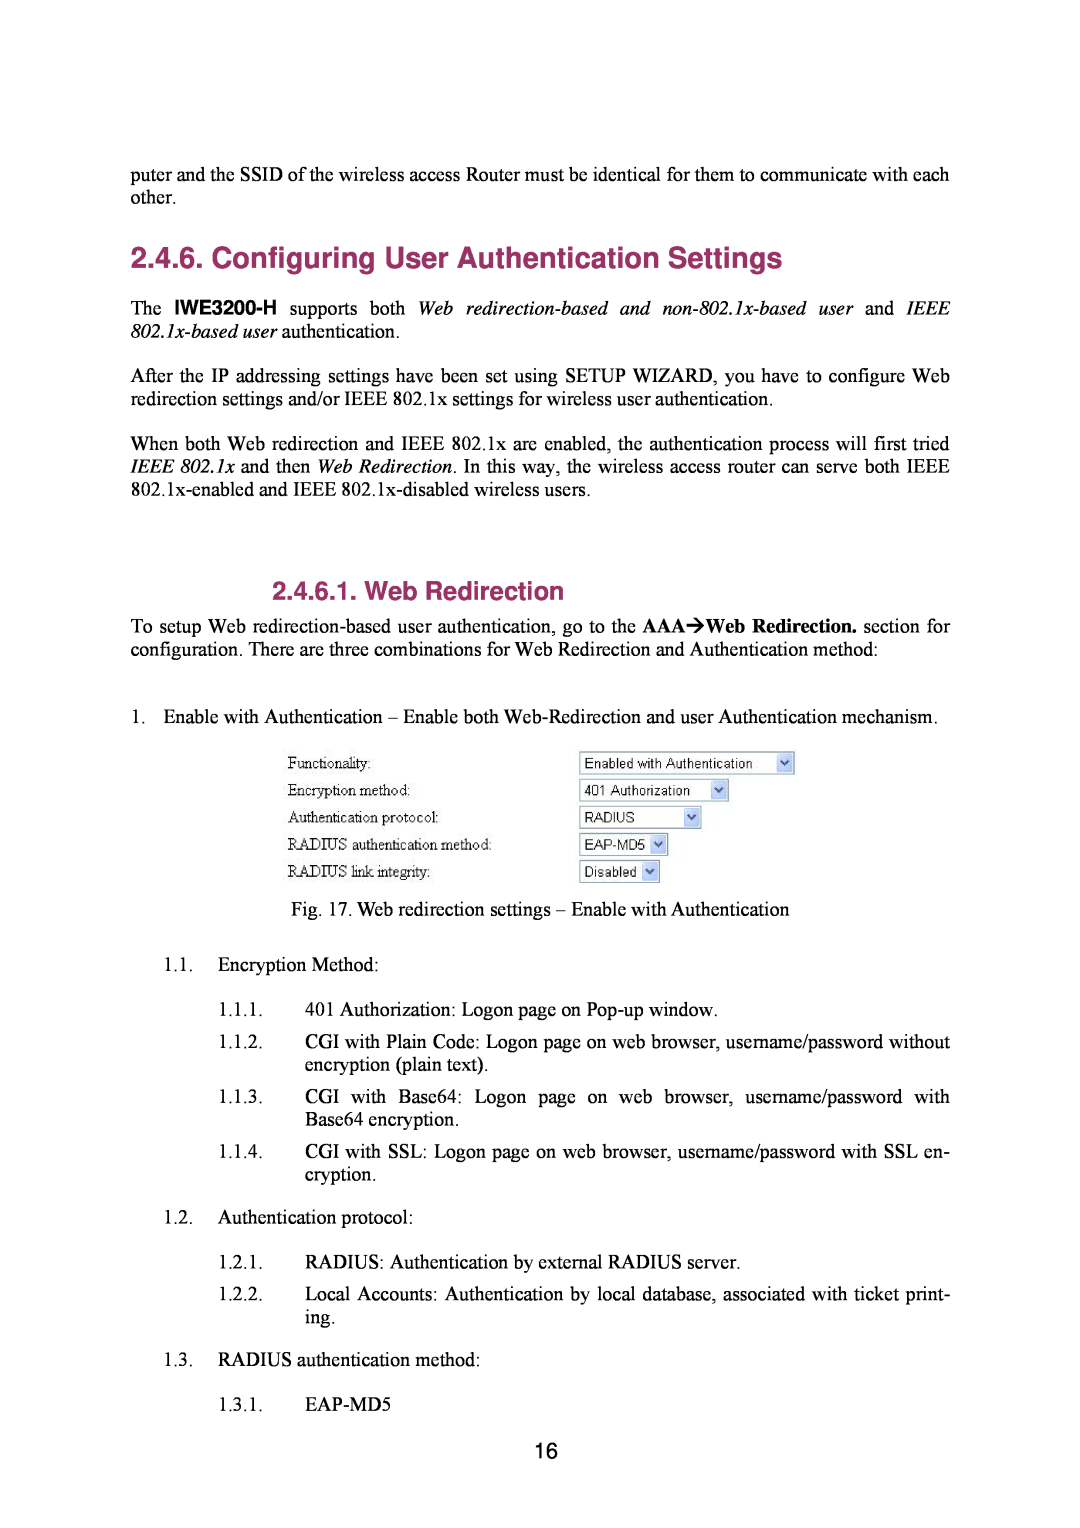 Epson IWE3200-H manual Configuring User Authentication Settings, Web Redirection 